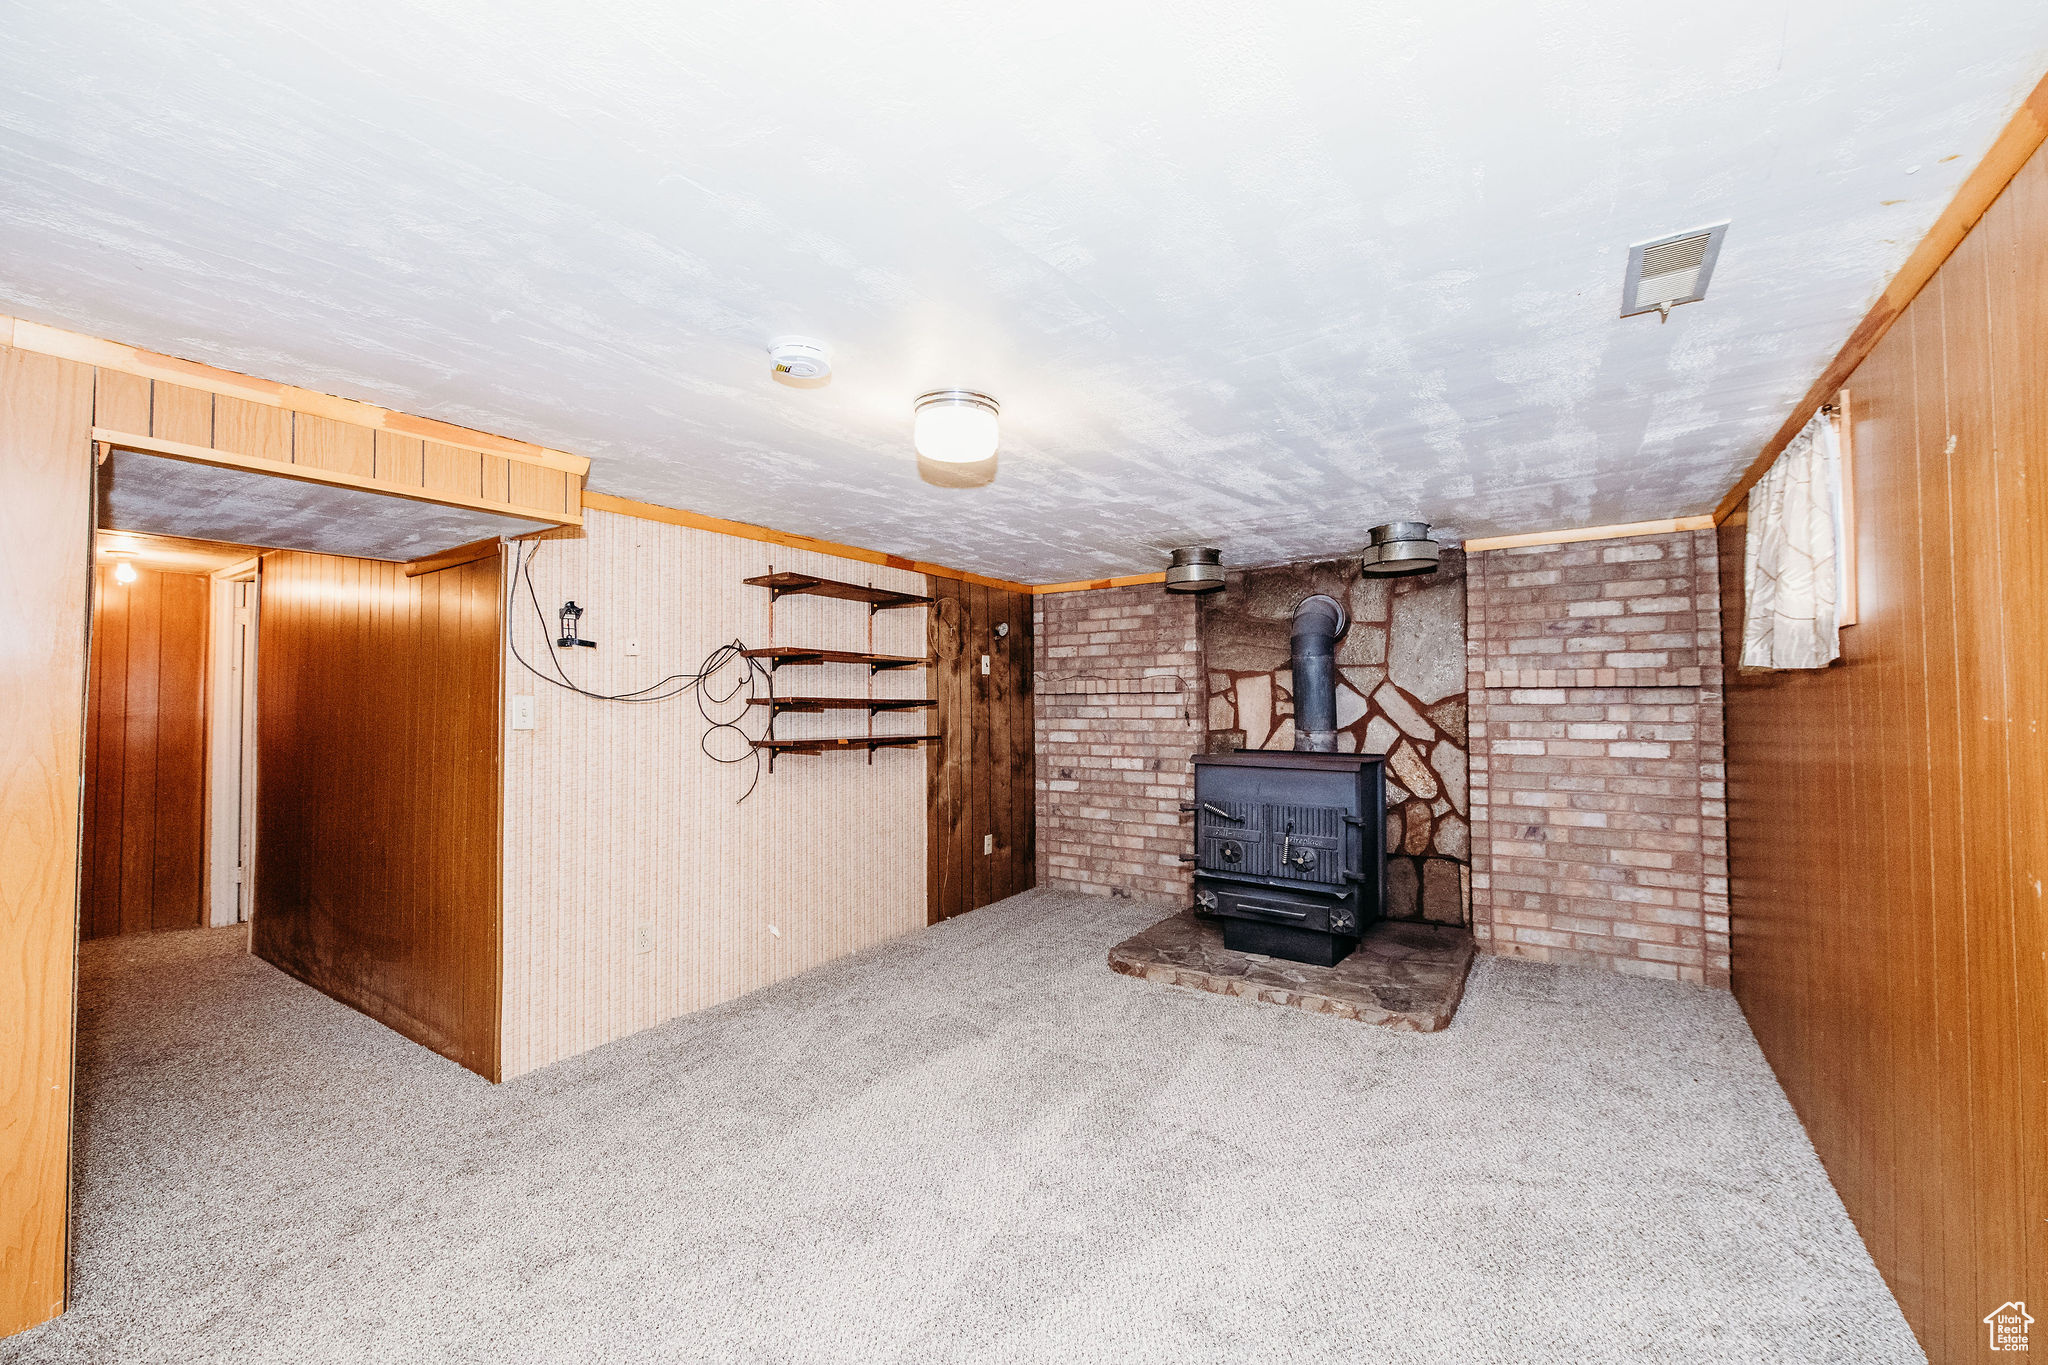 Basement featuring wood walls, light carpet, and a wood stove